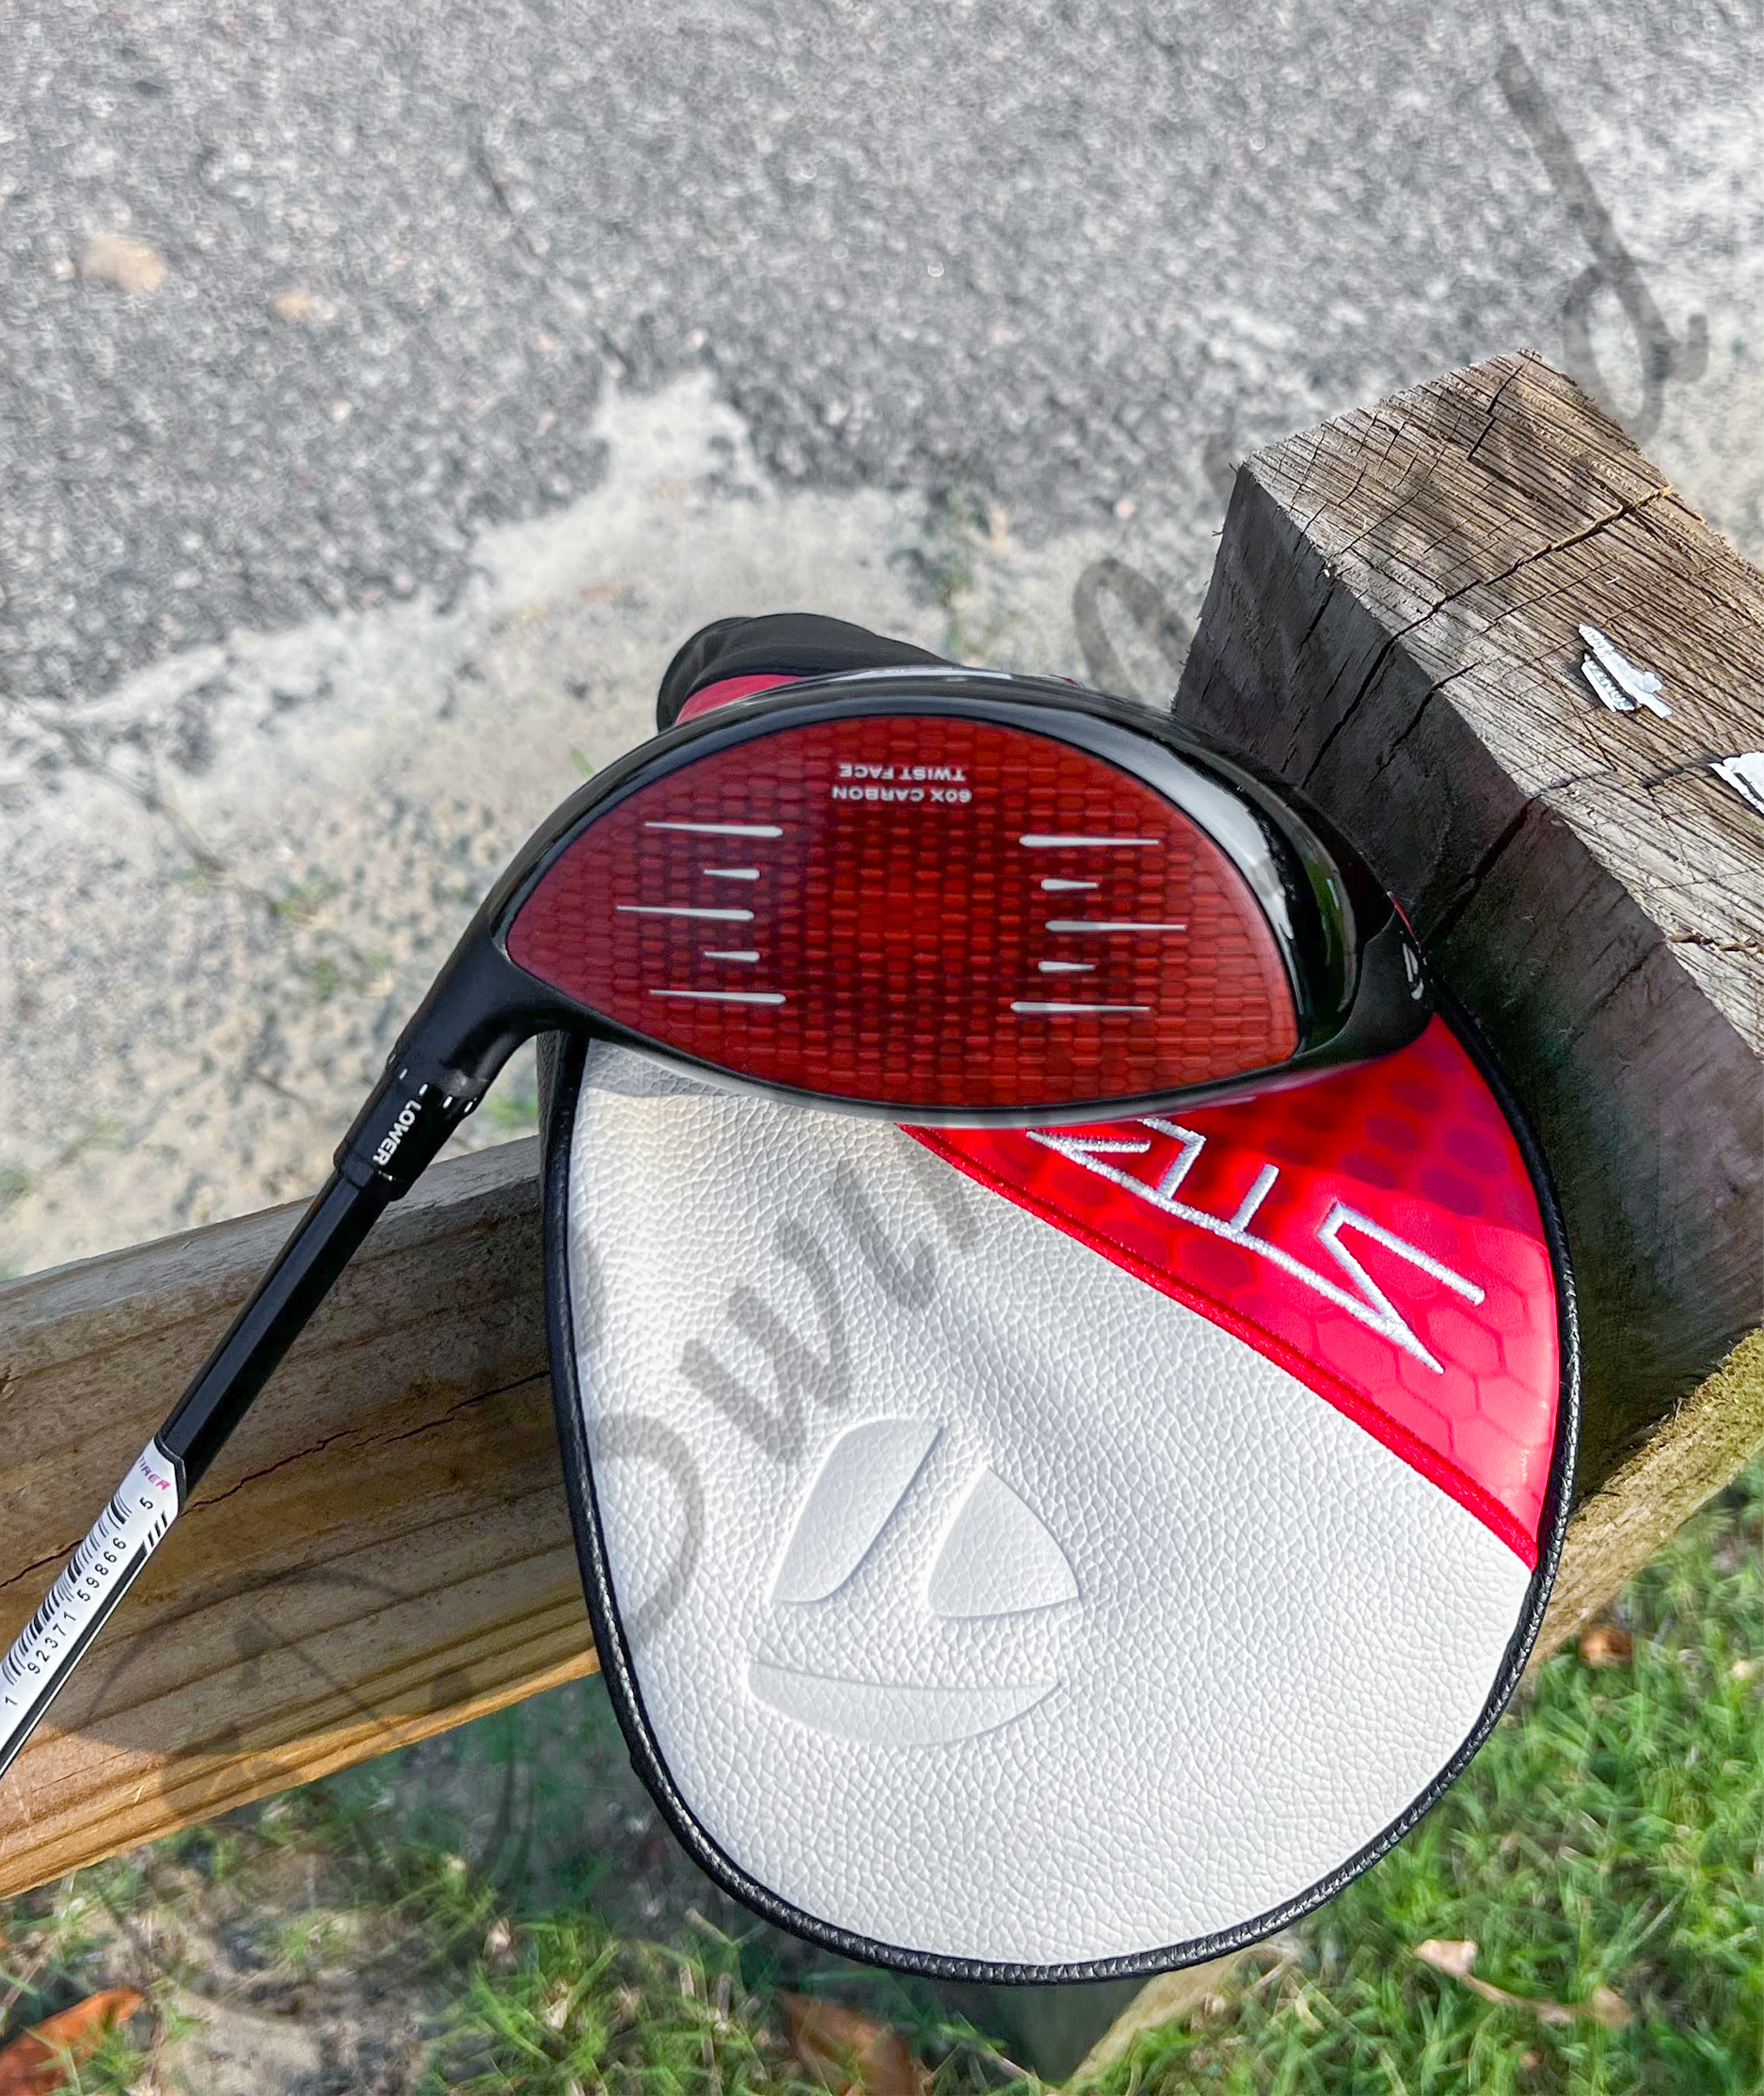 A closer view of TaylorMade Stealth 2 Plus driver's face and headcover